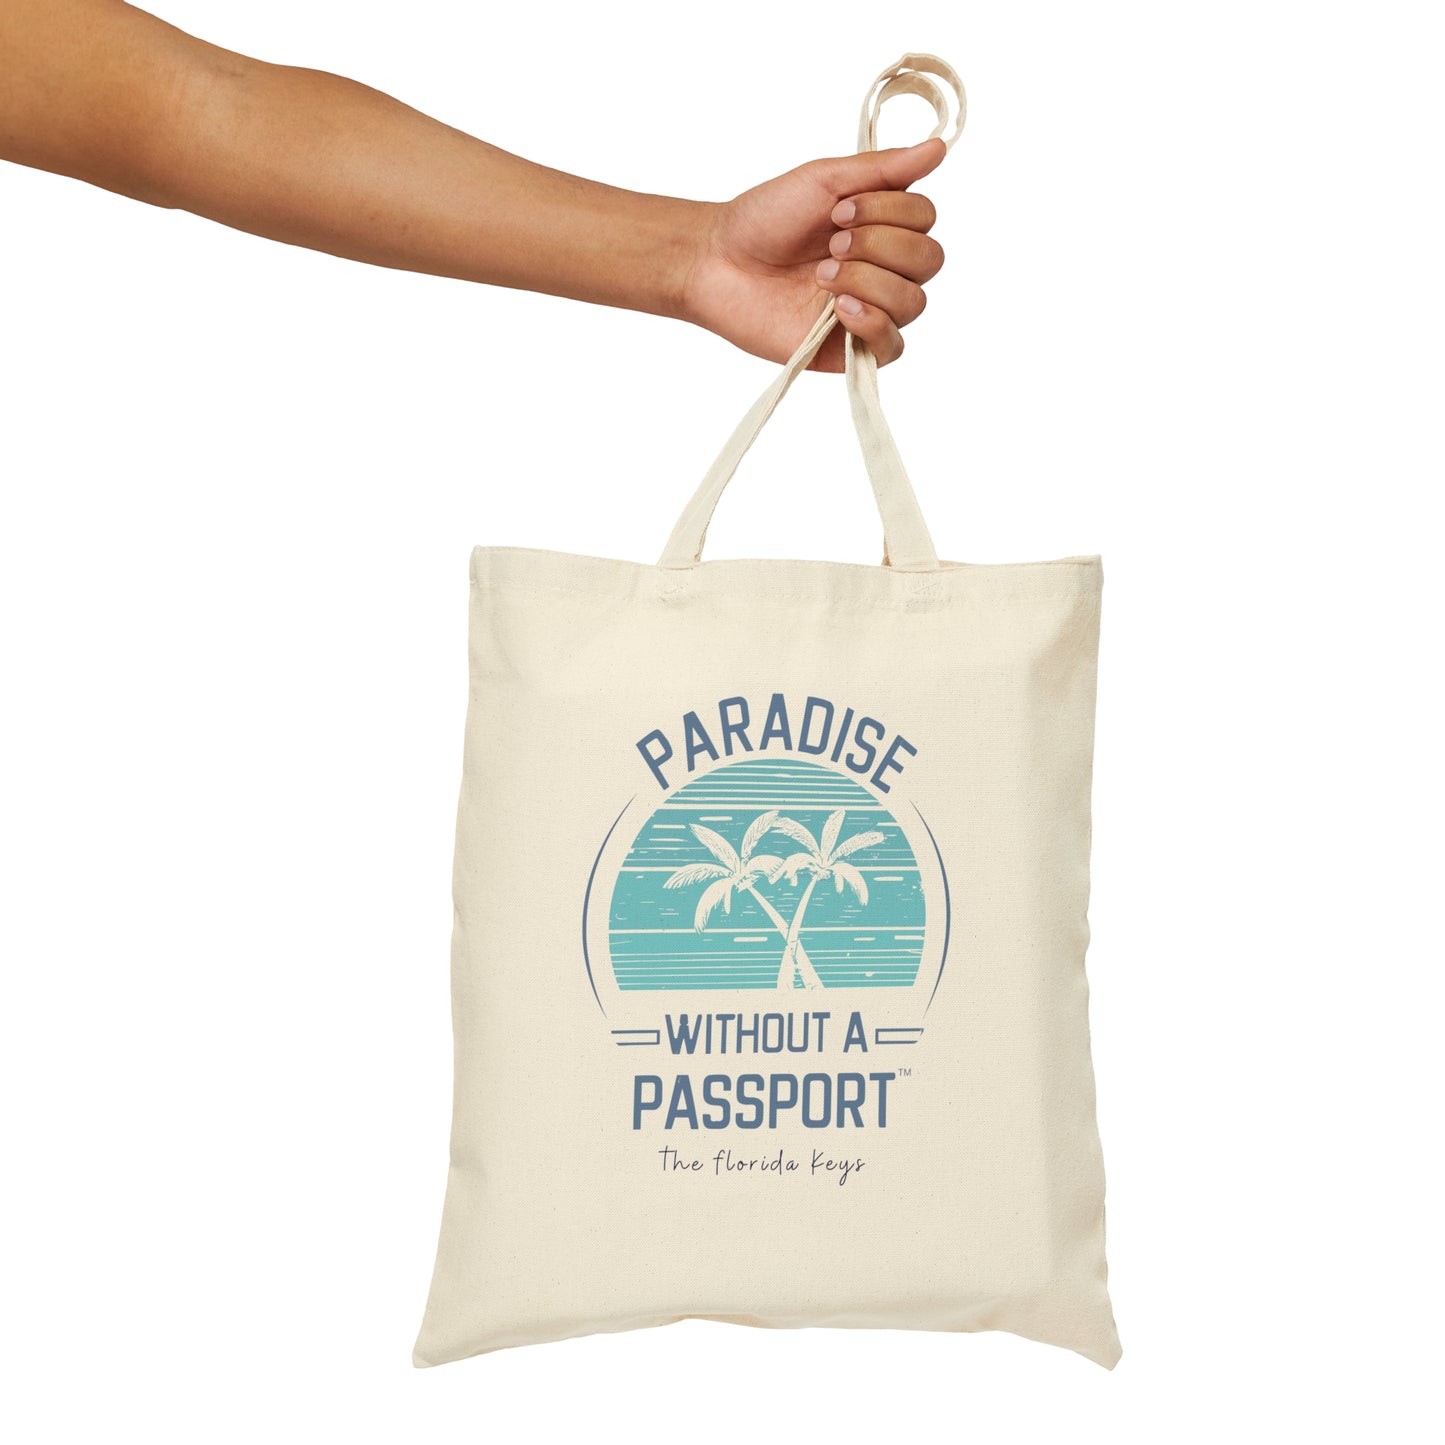 Paradise without a Passport Tote Bag - Beach tote florida keys